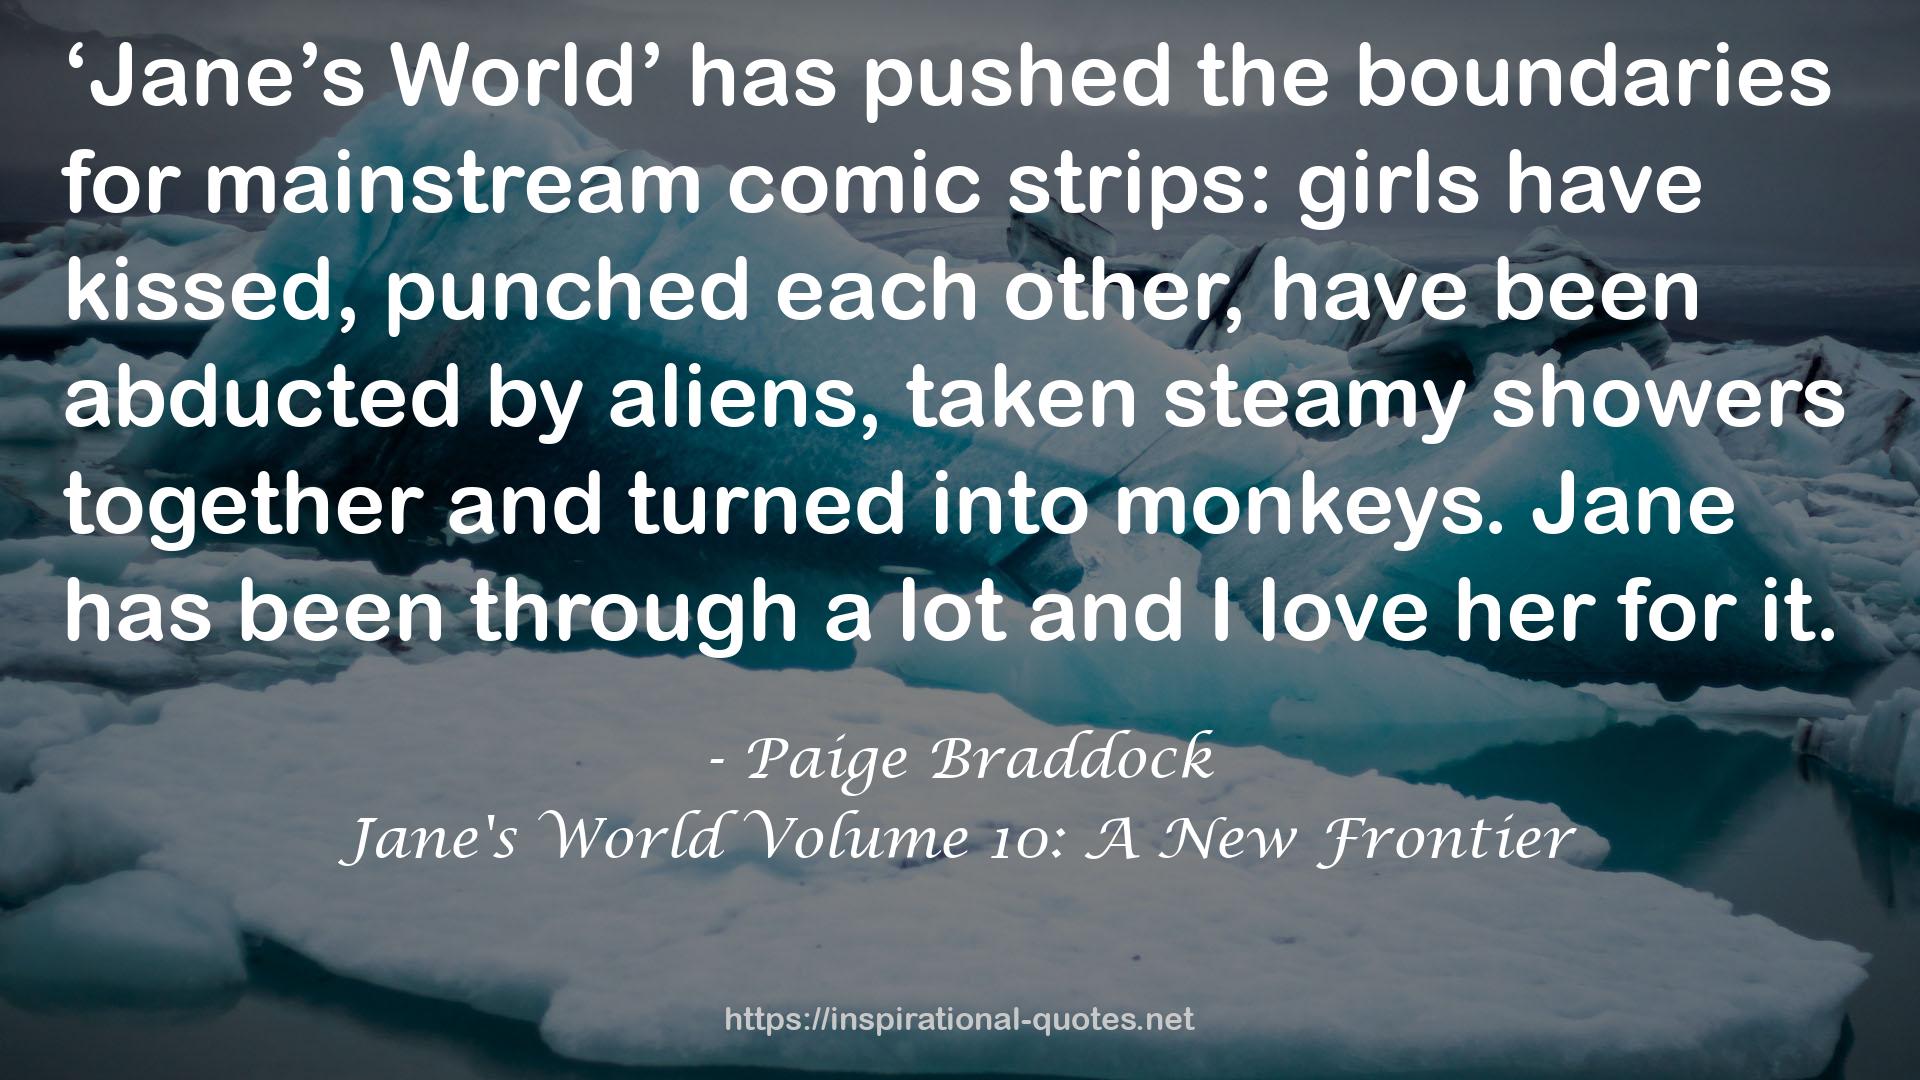 Jane's World Volume 10: A New Frontier QUOTES